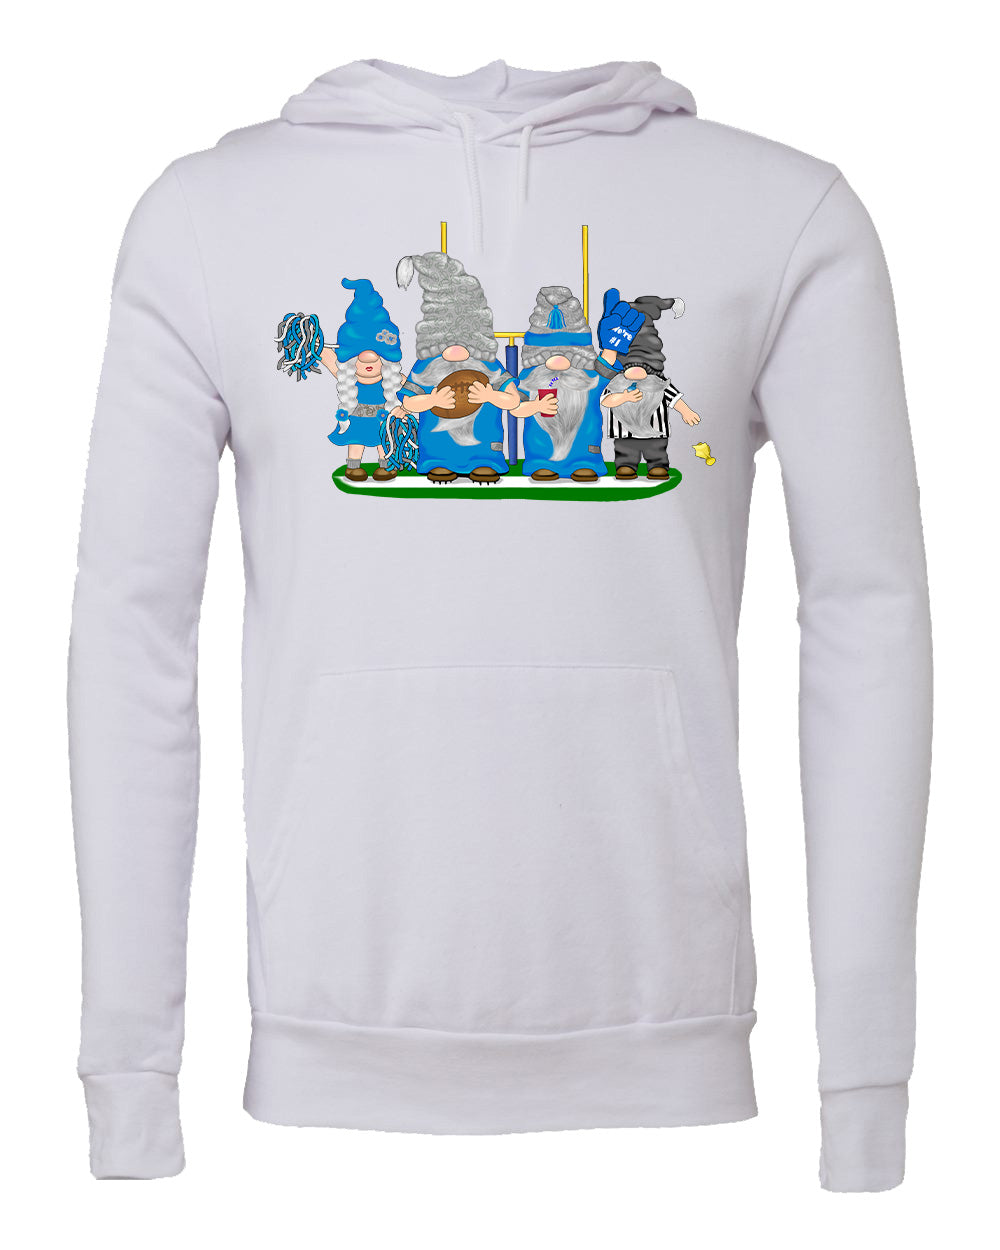 Blue & Silver Football Gnomes similar to Detroit) on Unisex Hoodie